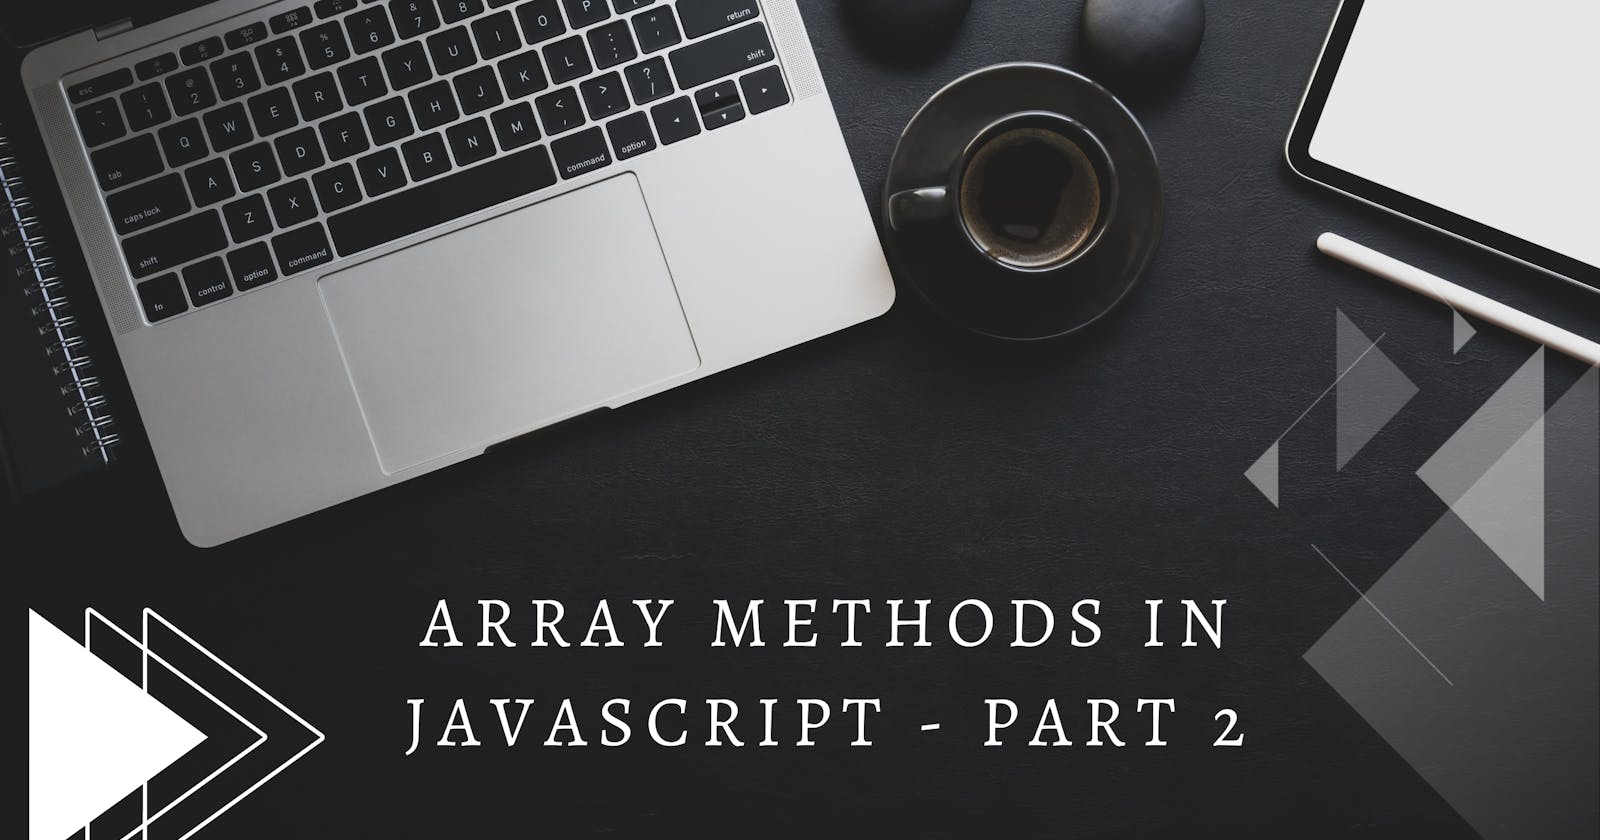 Array and Its Methods in Javascript - PART 2